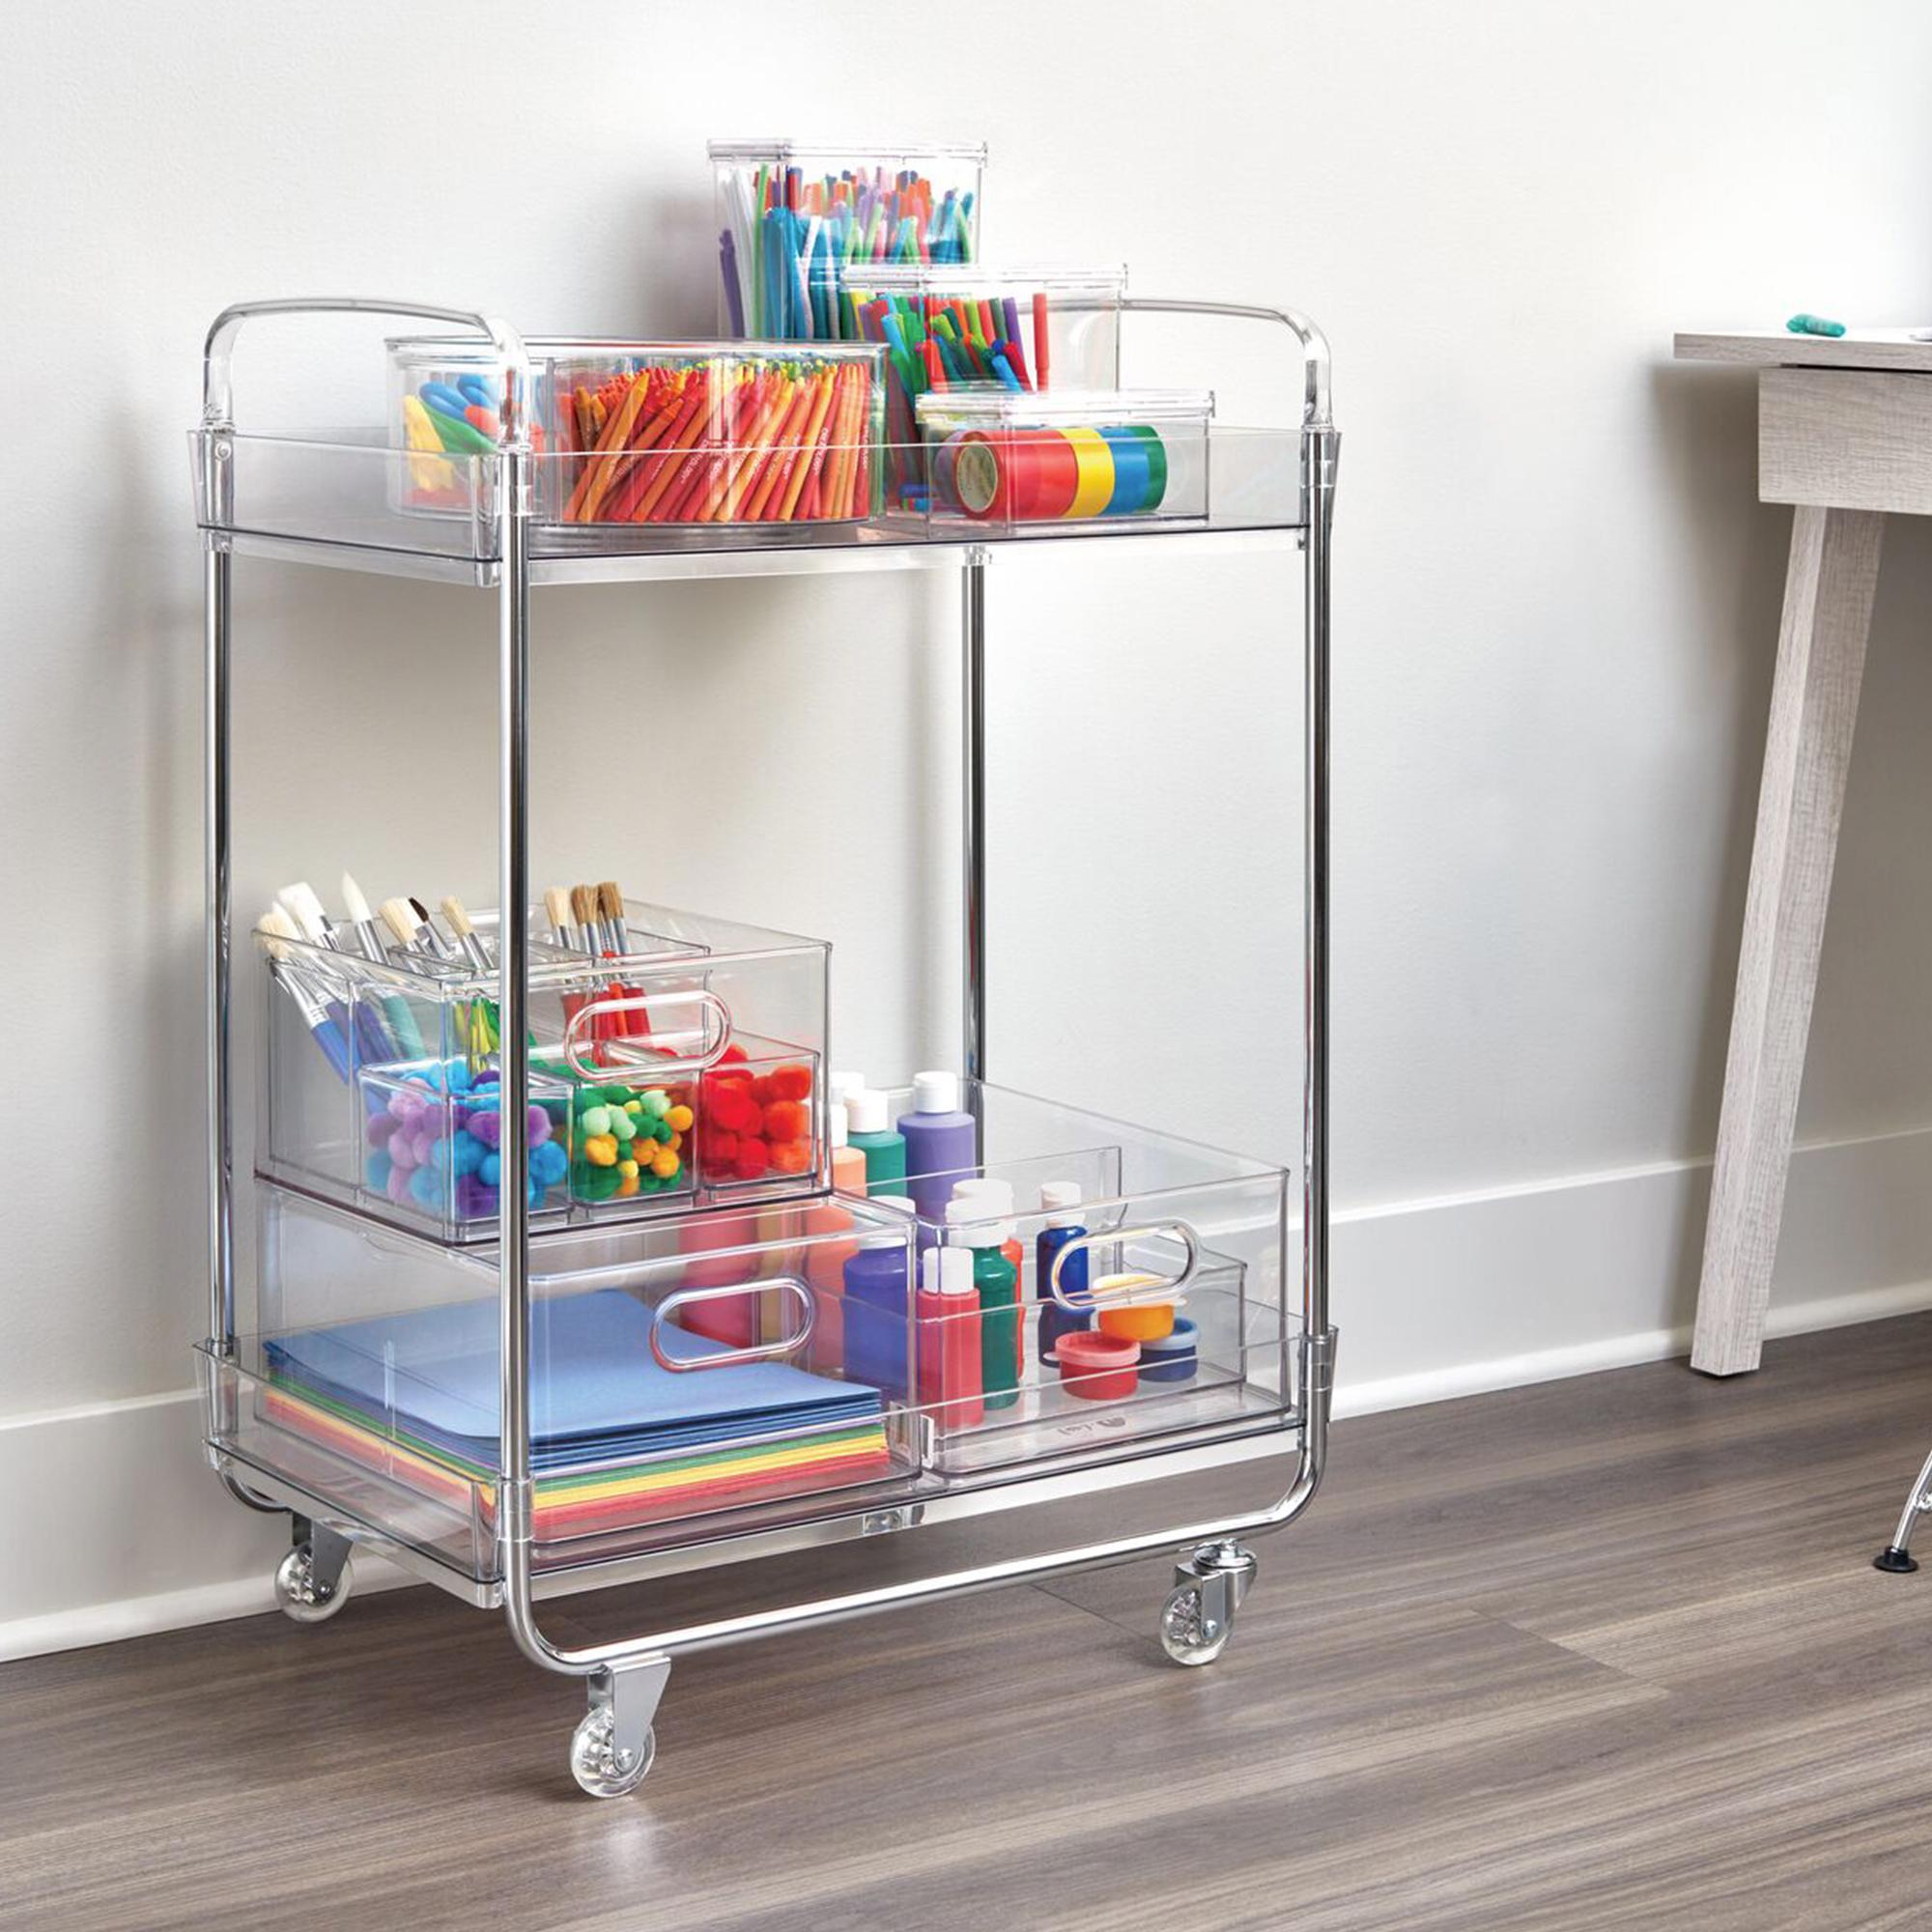 The Home Edit by iDesign Storage Cart Image 4